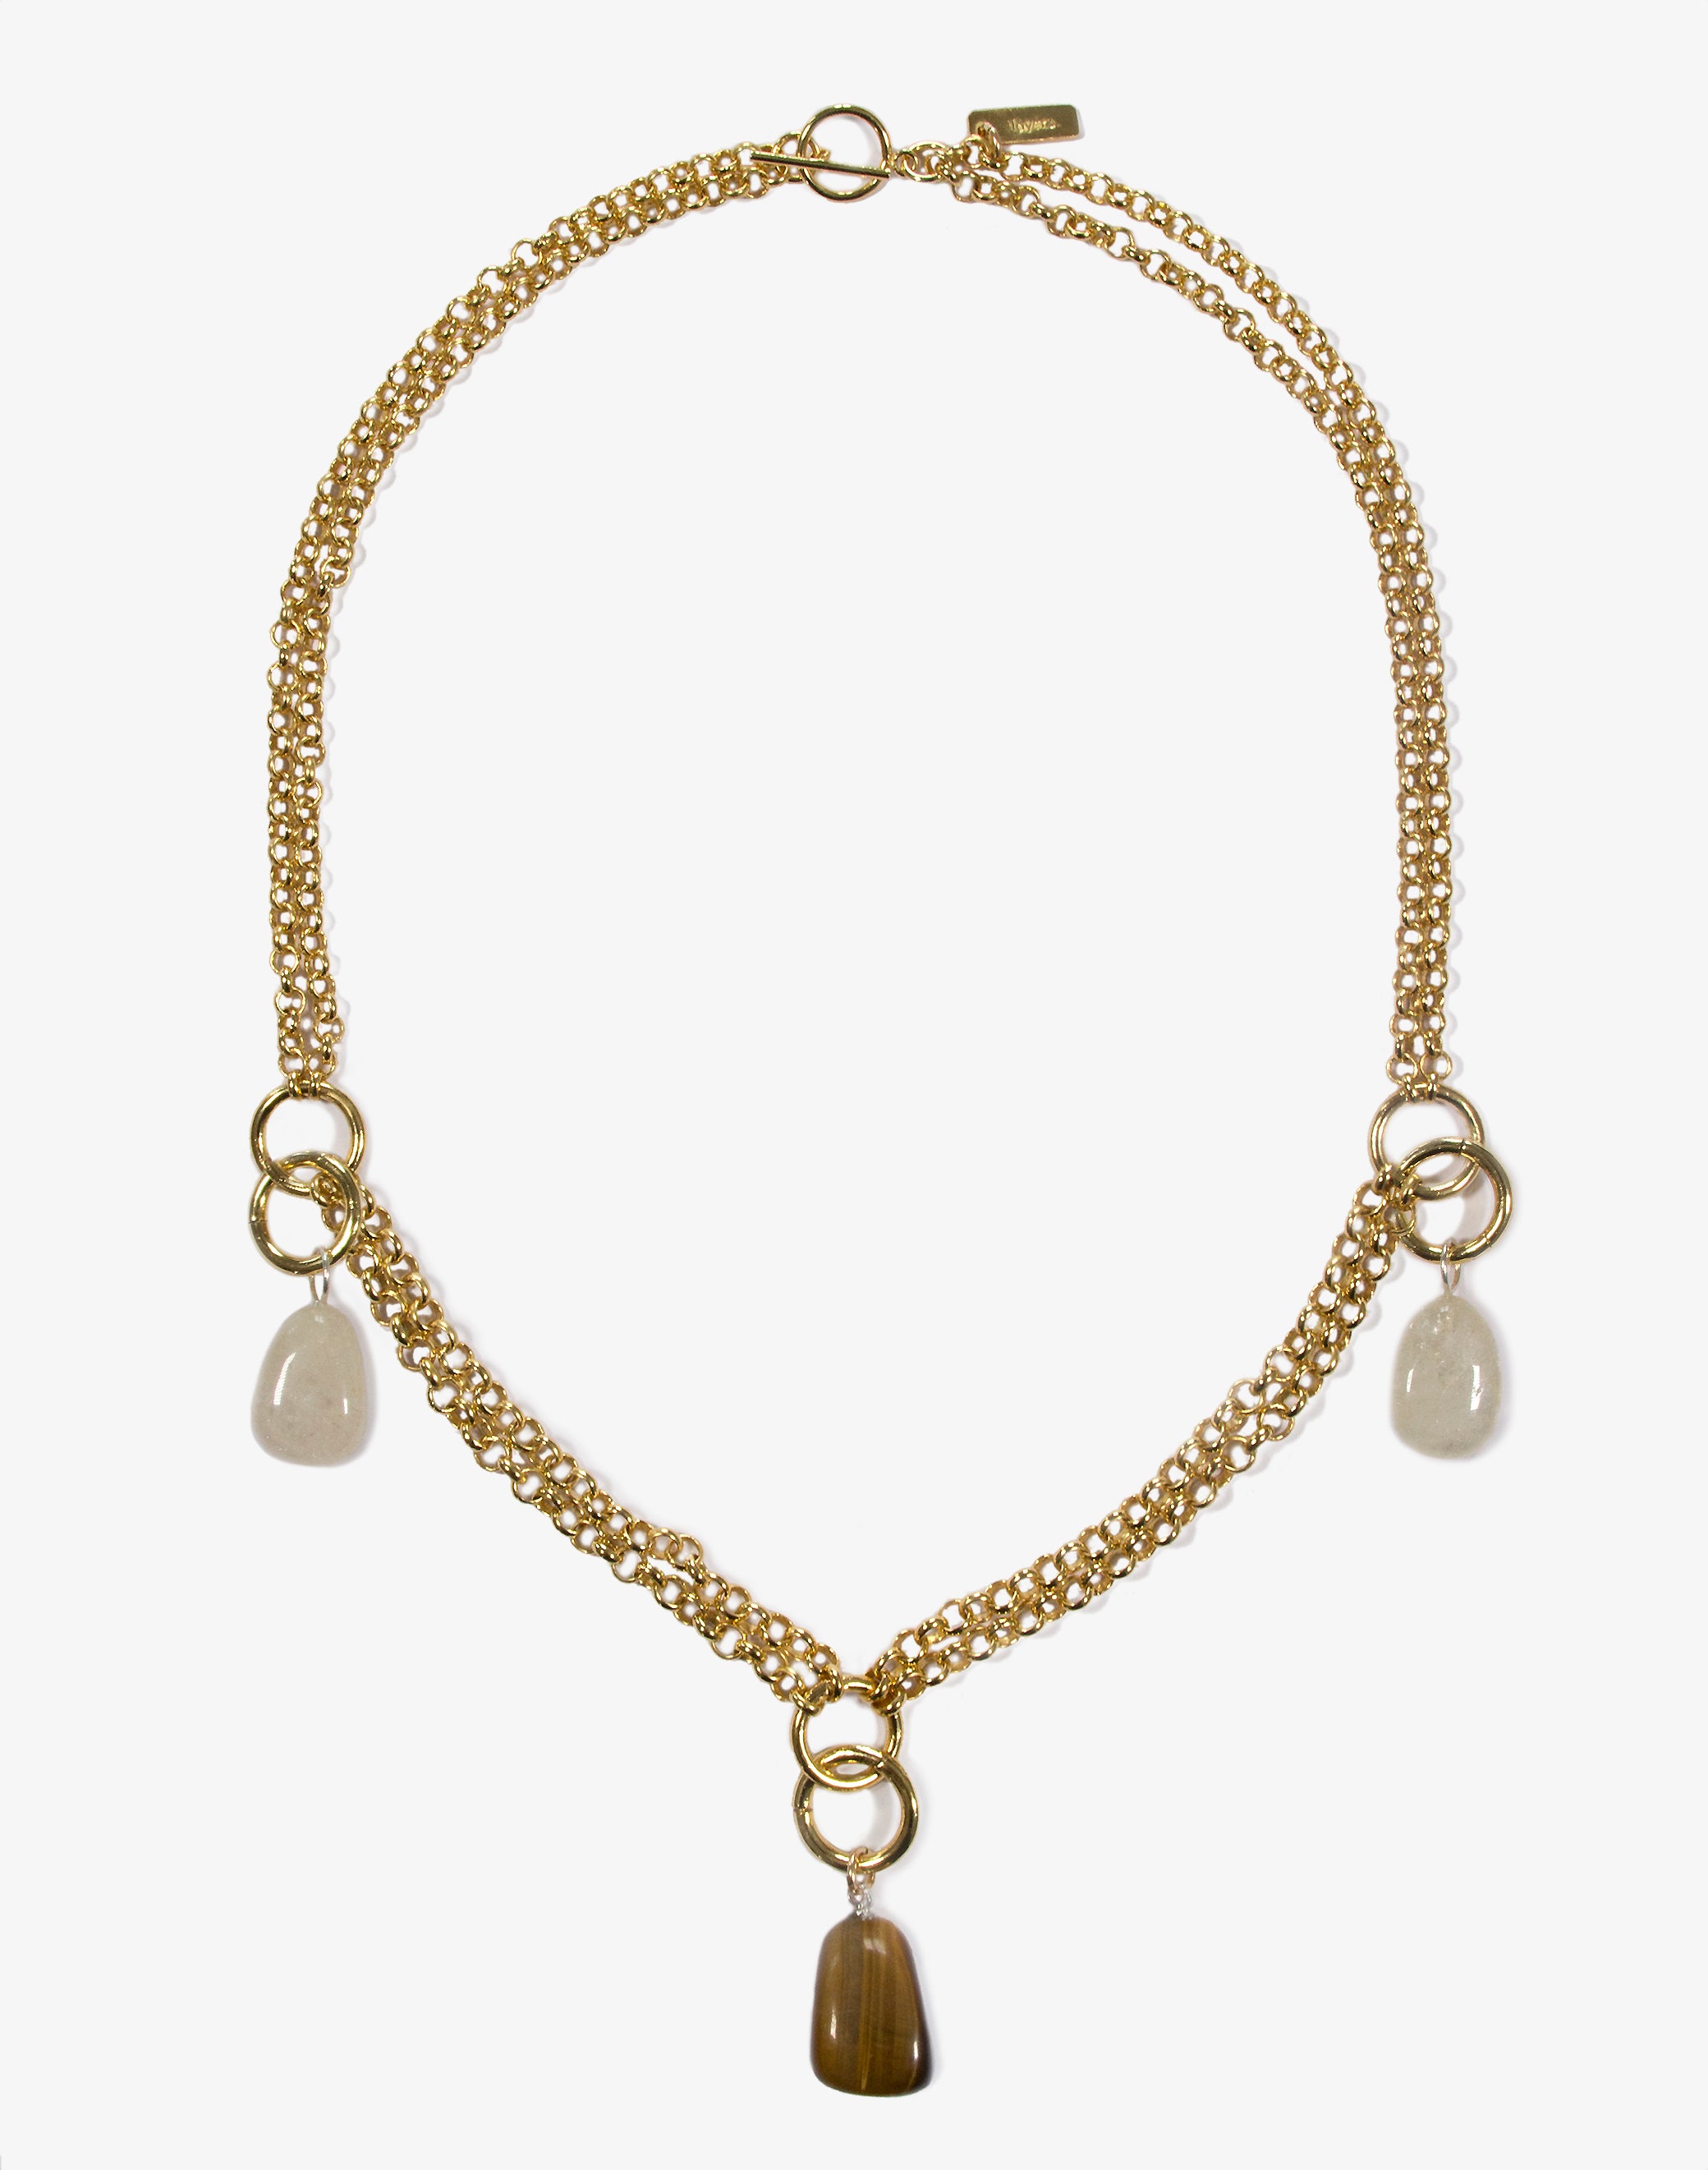 llayers Gold women minimal long chain choker necklace with stones Hancrafted in Brooklyn New York 2